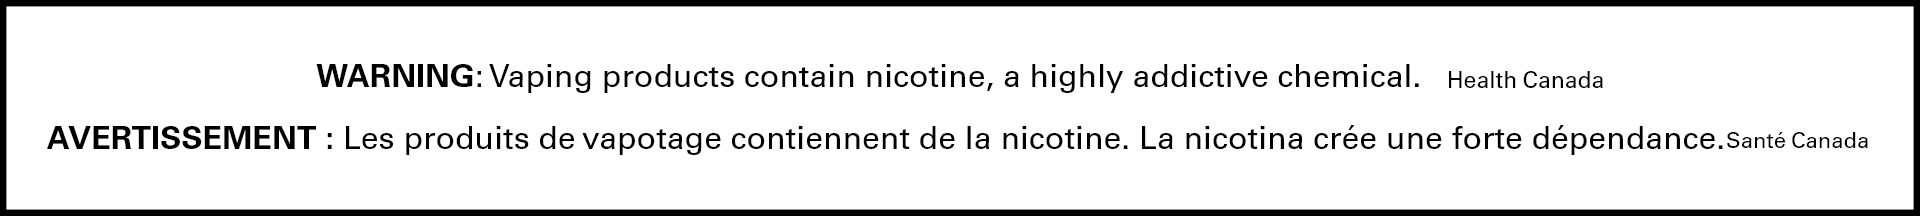 WARNING:Vaping products contain nicotine,highly addictive chemical.Health Canada